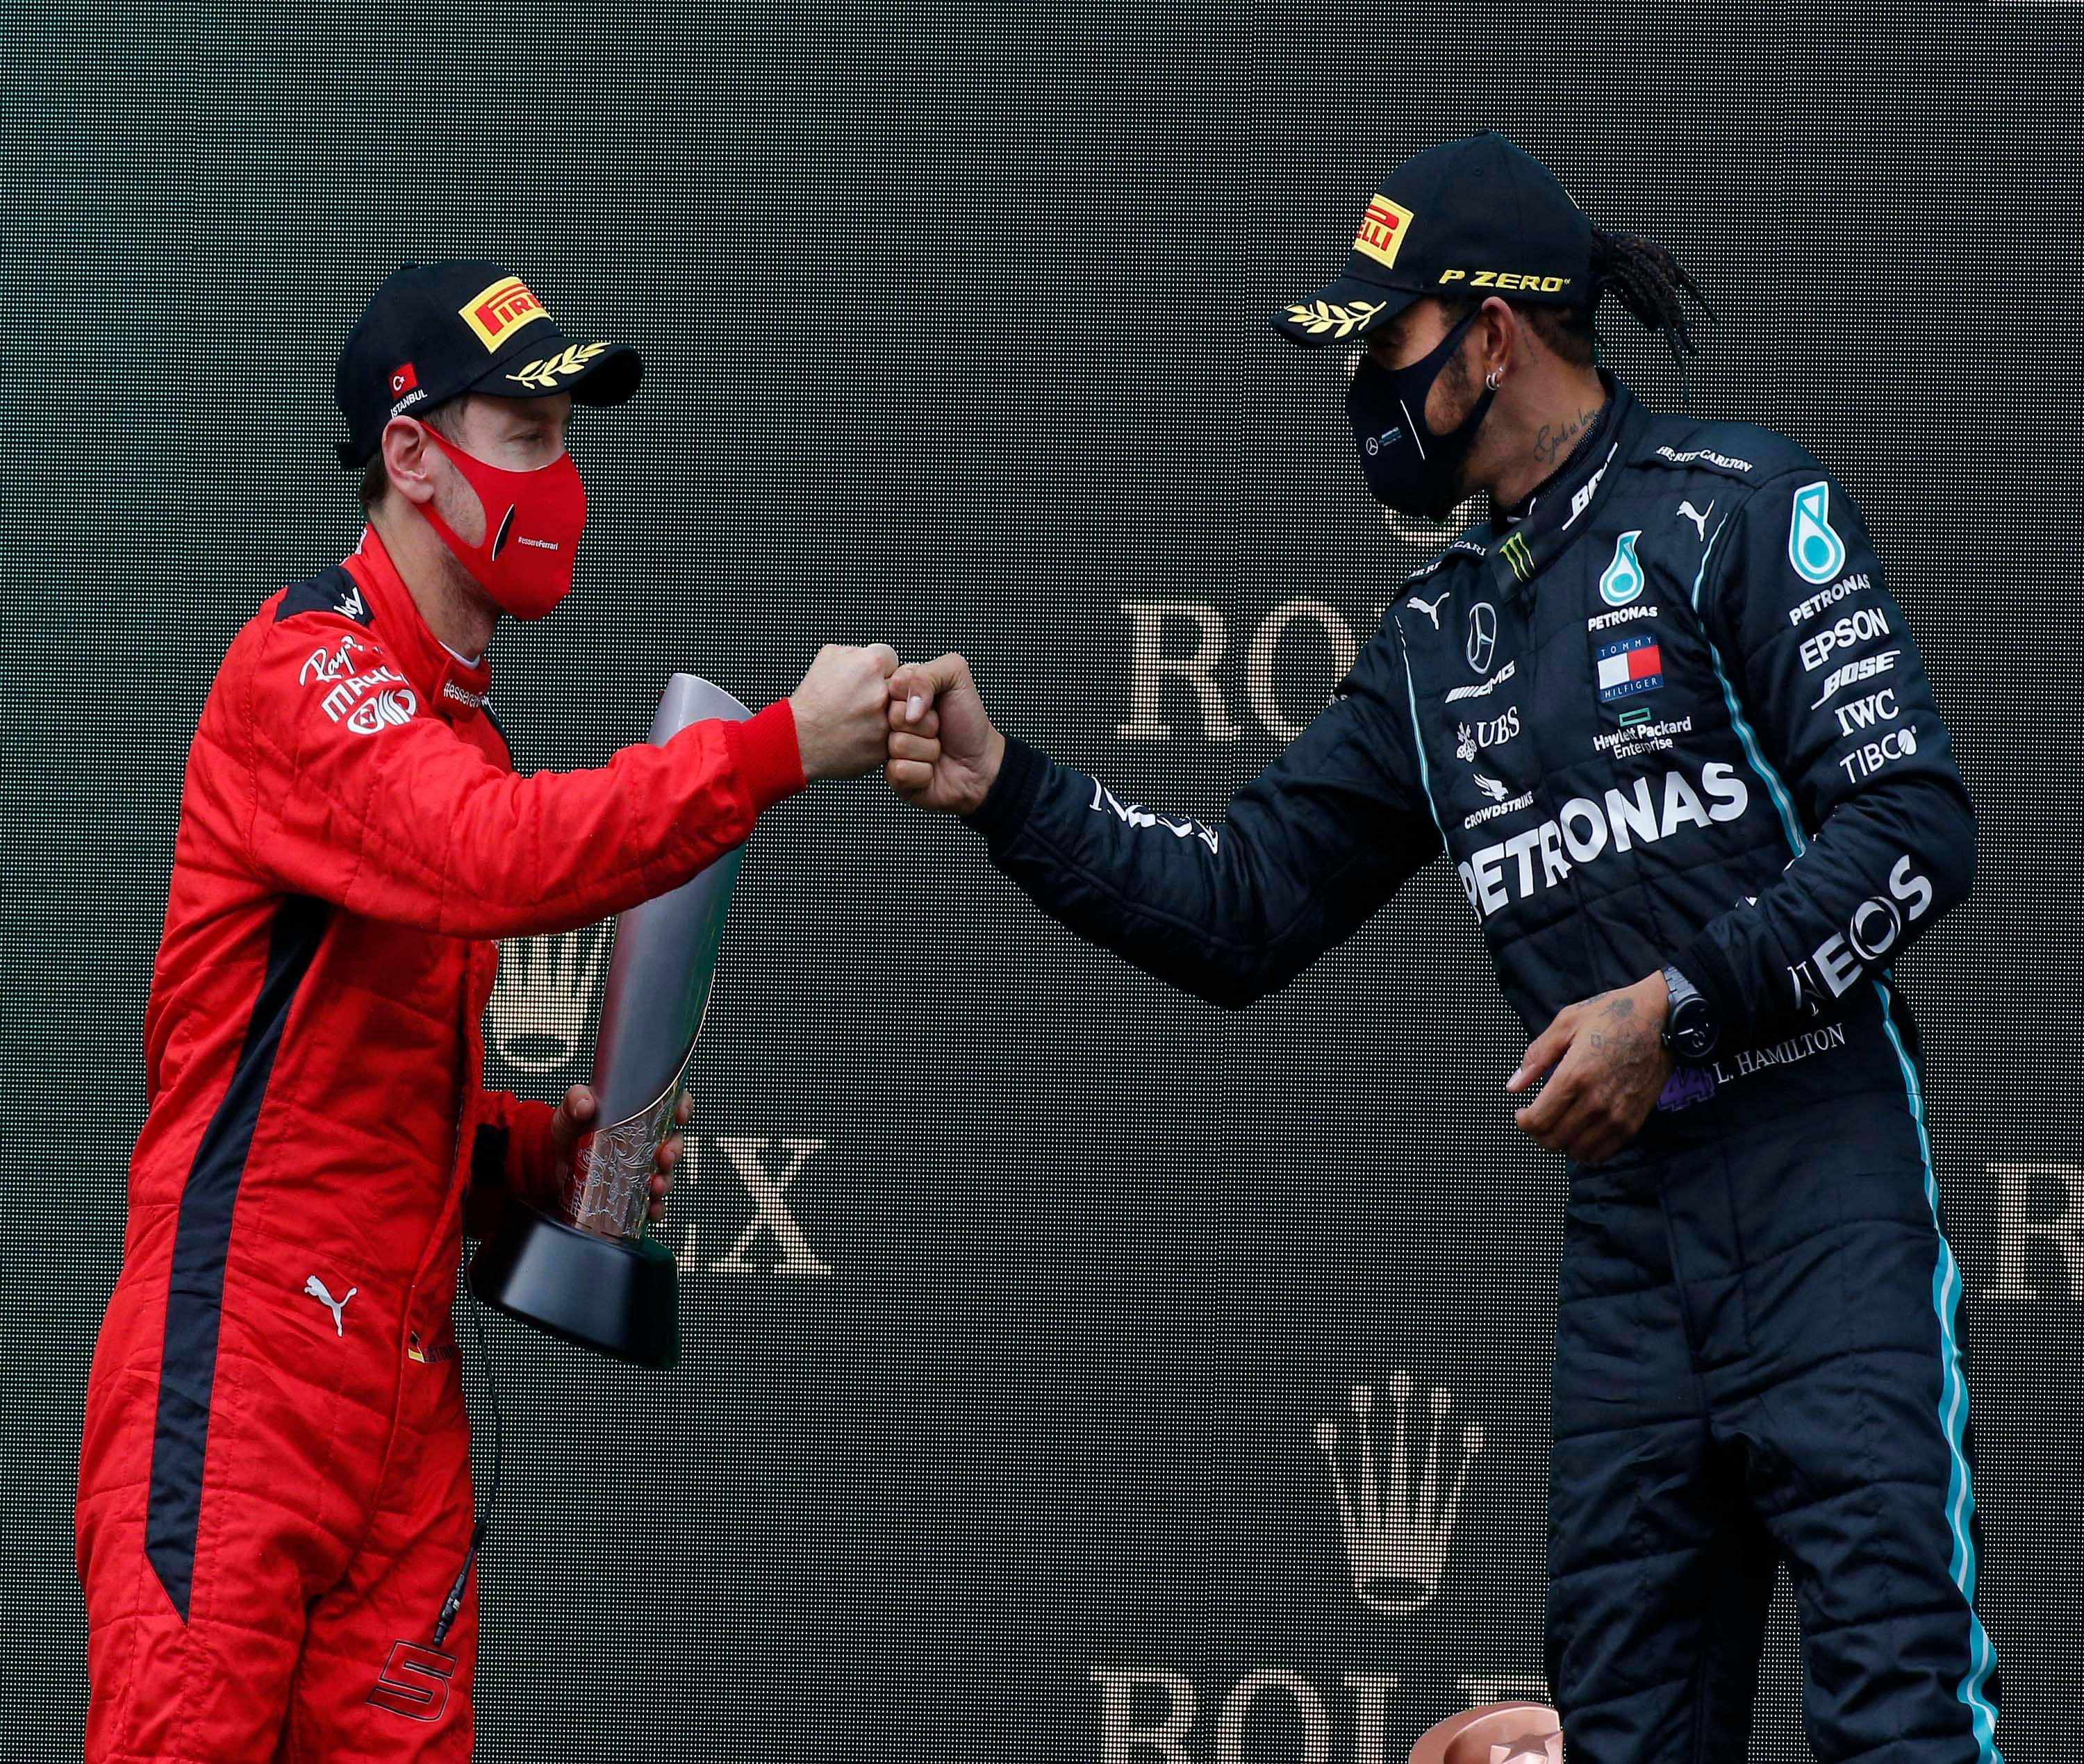  Third placed Ferrari driver Sebastian Vettel of Germany, left, and race winner Mercedes driver Lewis Hamilton of Britain greet each other on the podium of the Formula One Turkish Grand Prix at the Istanbul Park circuit racetrack in Istanbul, Sunday, Nov. 15, 2020. Racing Point driver Sergio Perez of Mexico finished second. Credit: AP/PTI Photo